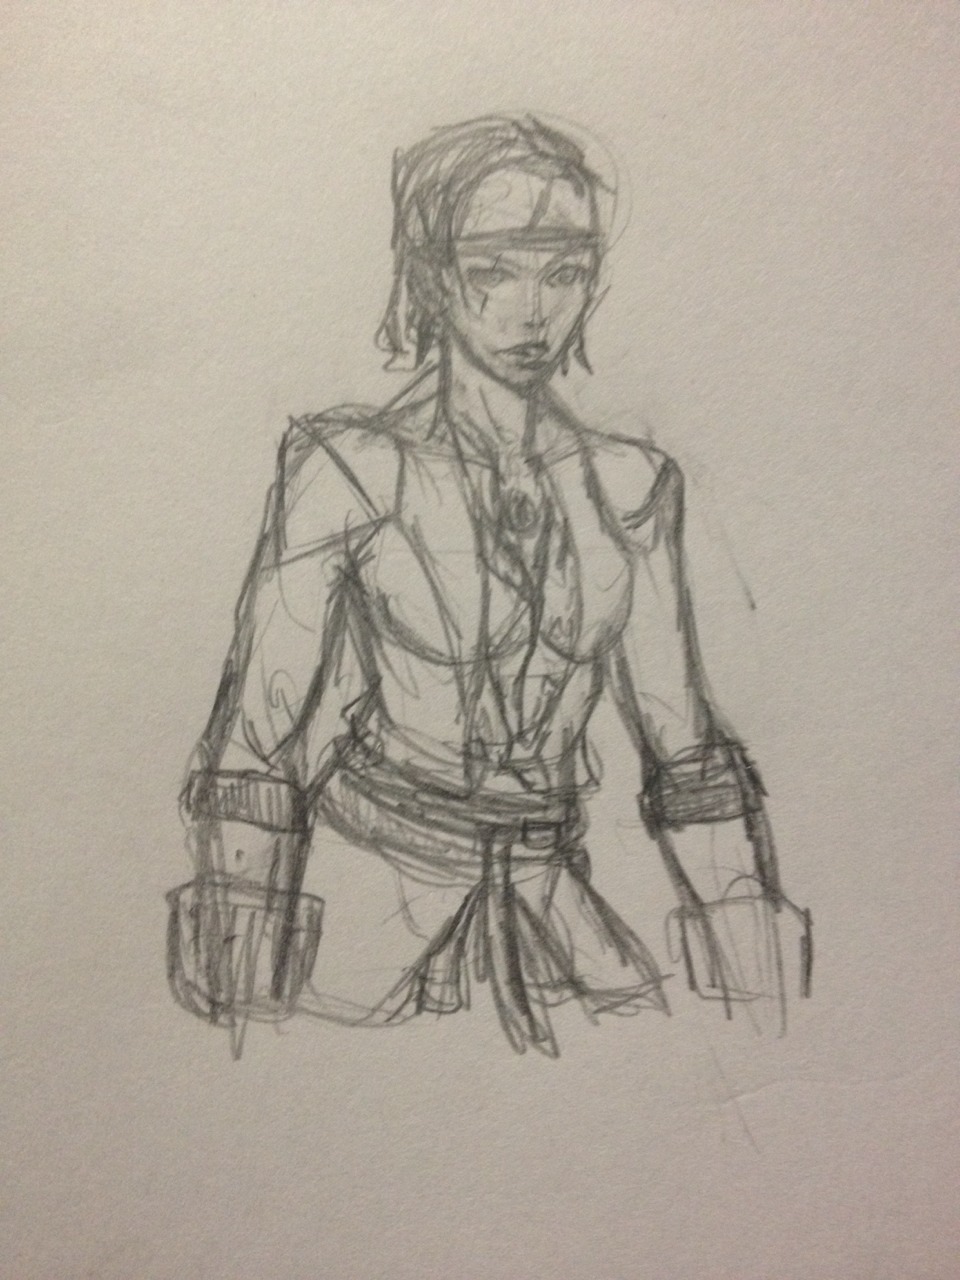 A quick sketch of James the Kidd from assassins creed 4.   I&rsquo;ll redo this